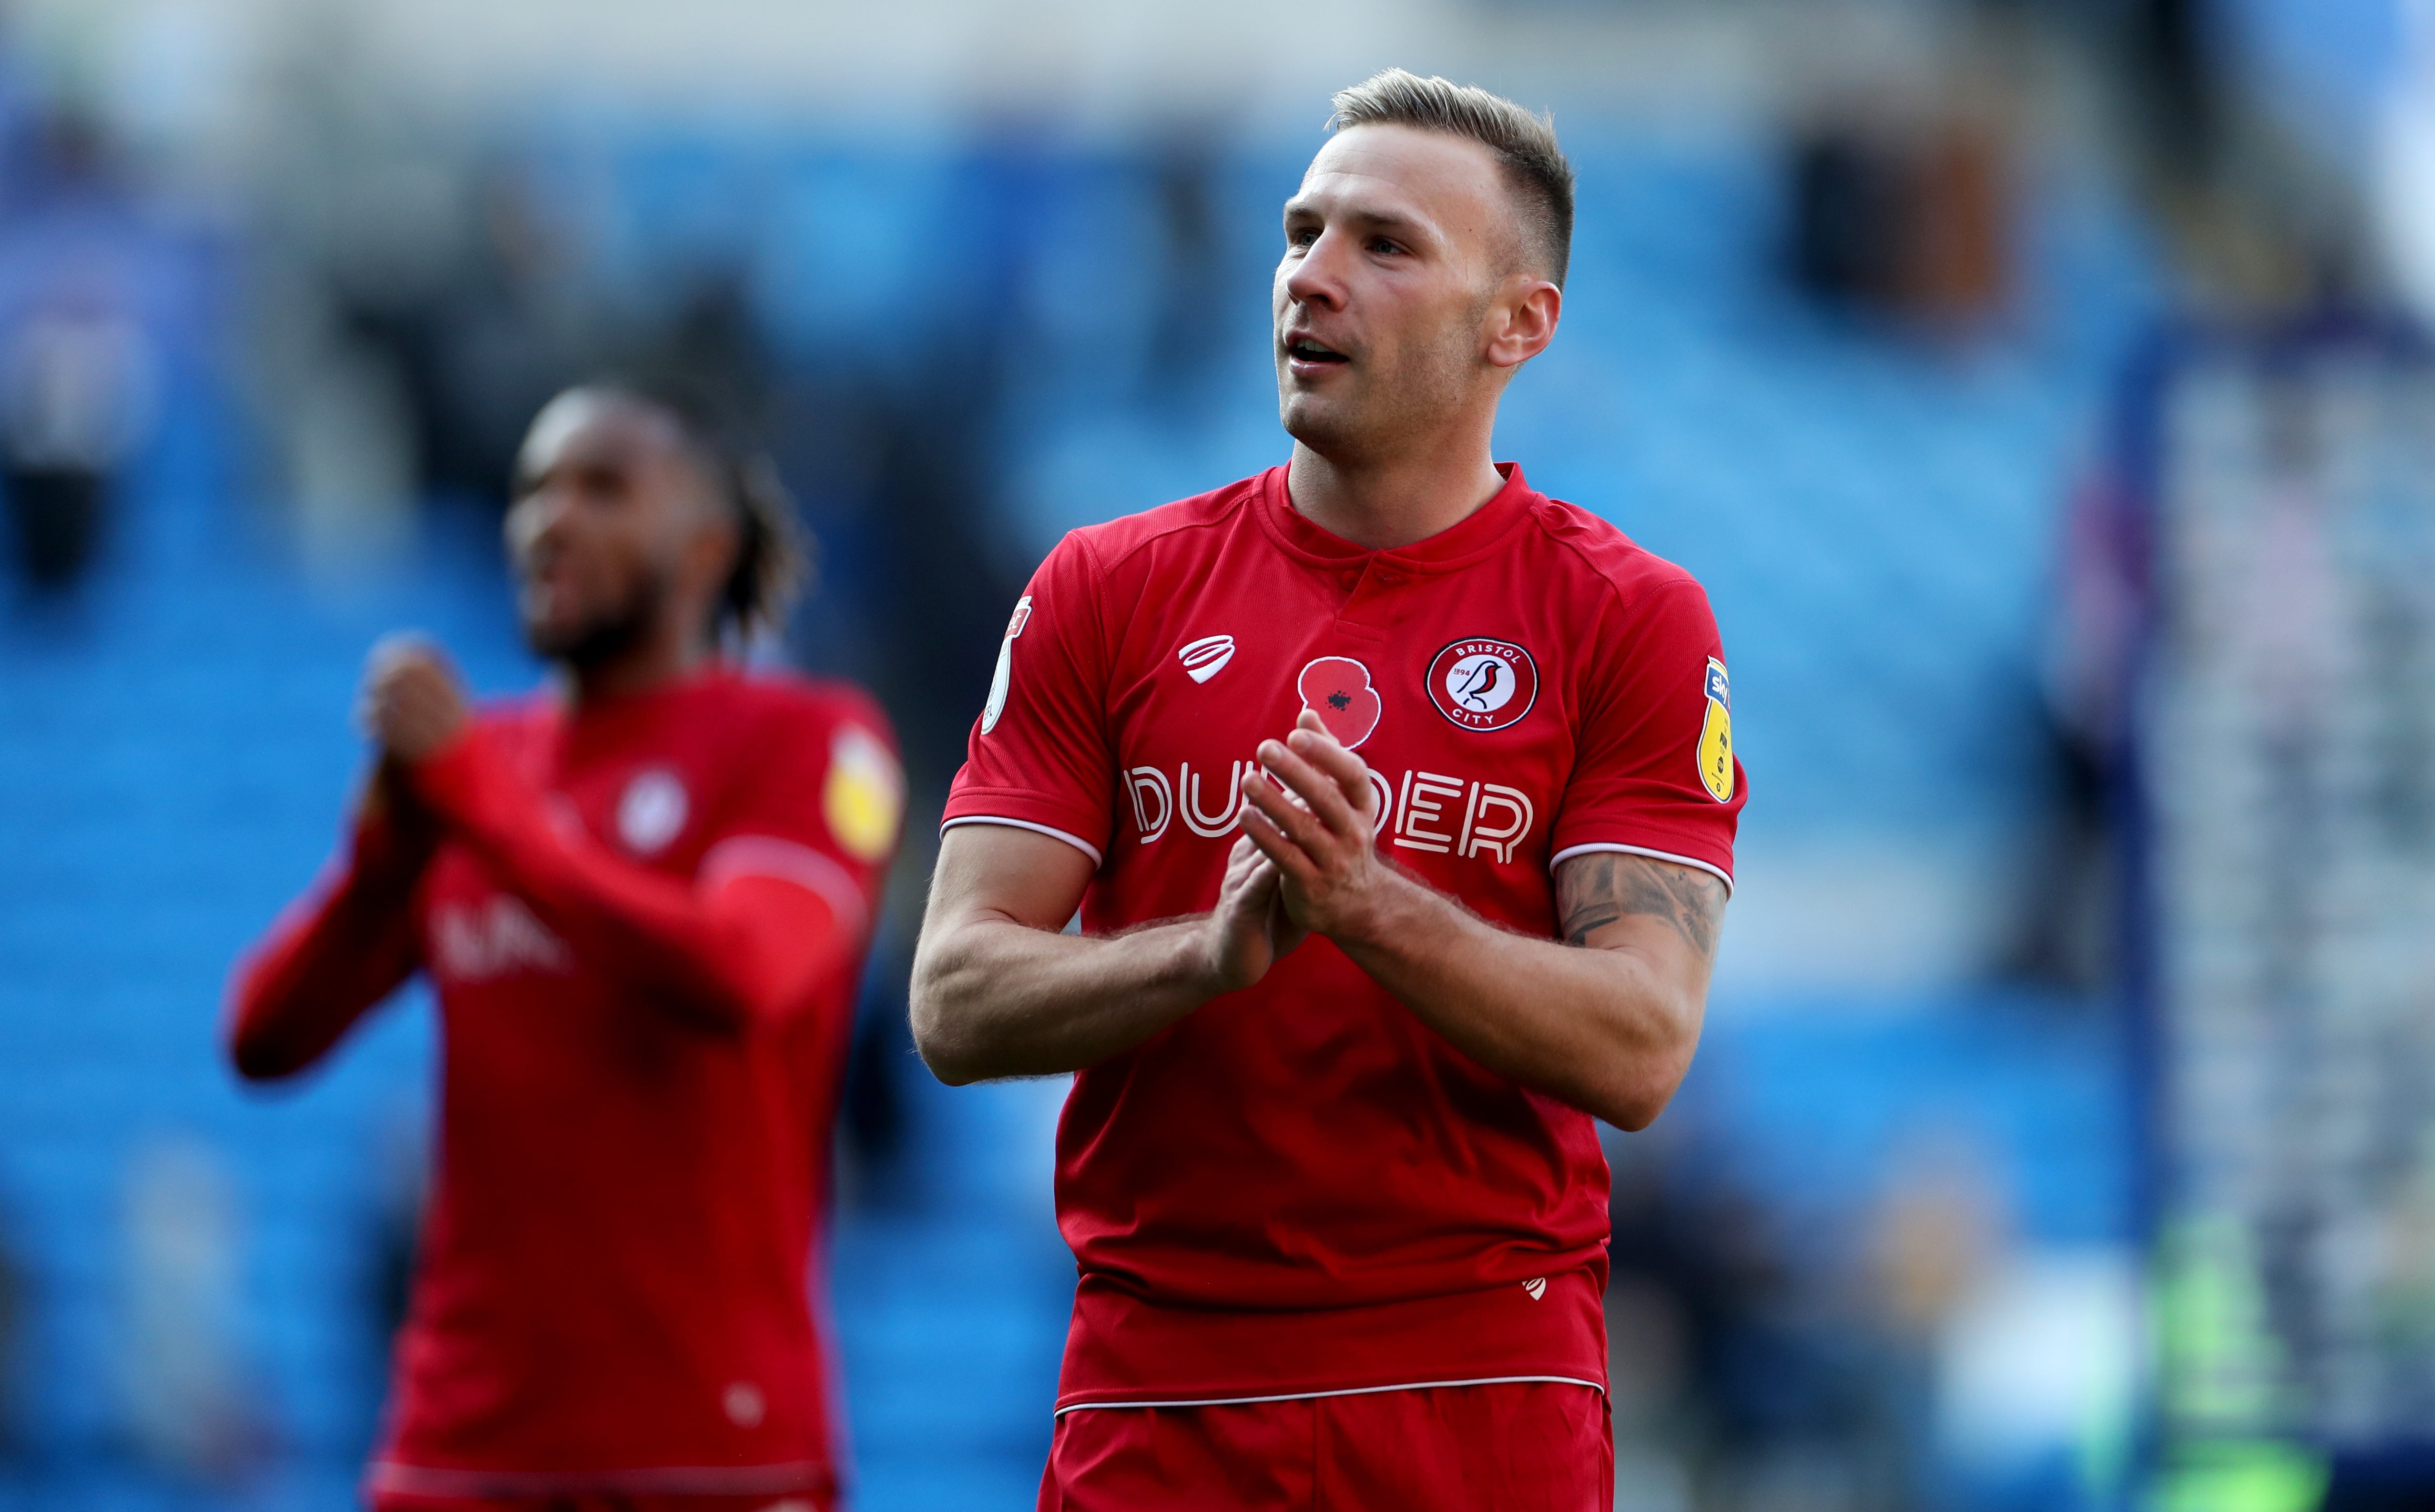 Bristol City’s Andreas Weimann applauds the fans at full time during the Sky Bet Championship match at the Cardiff City Stadium.